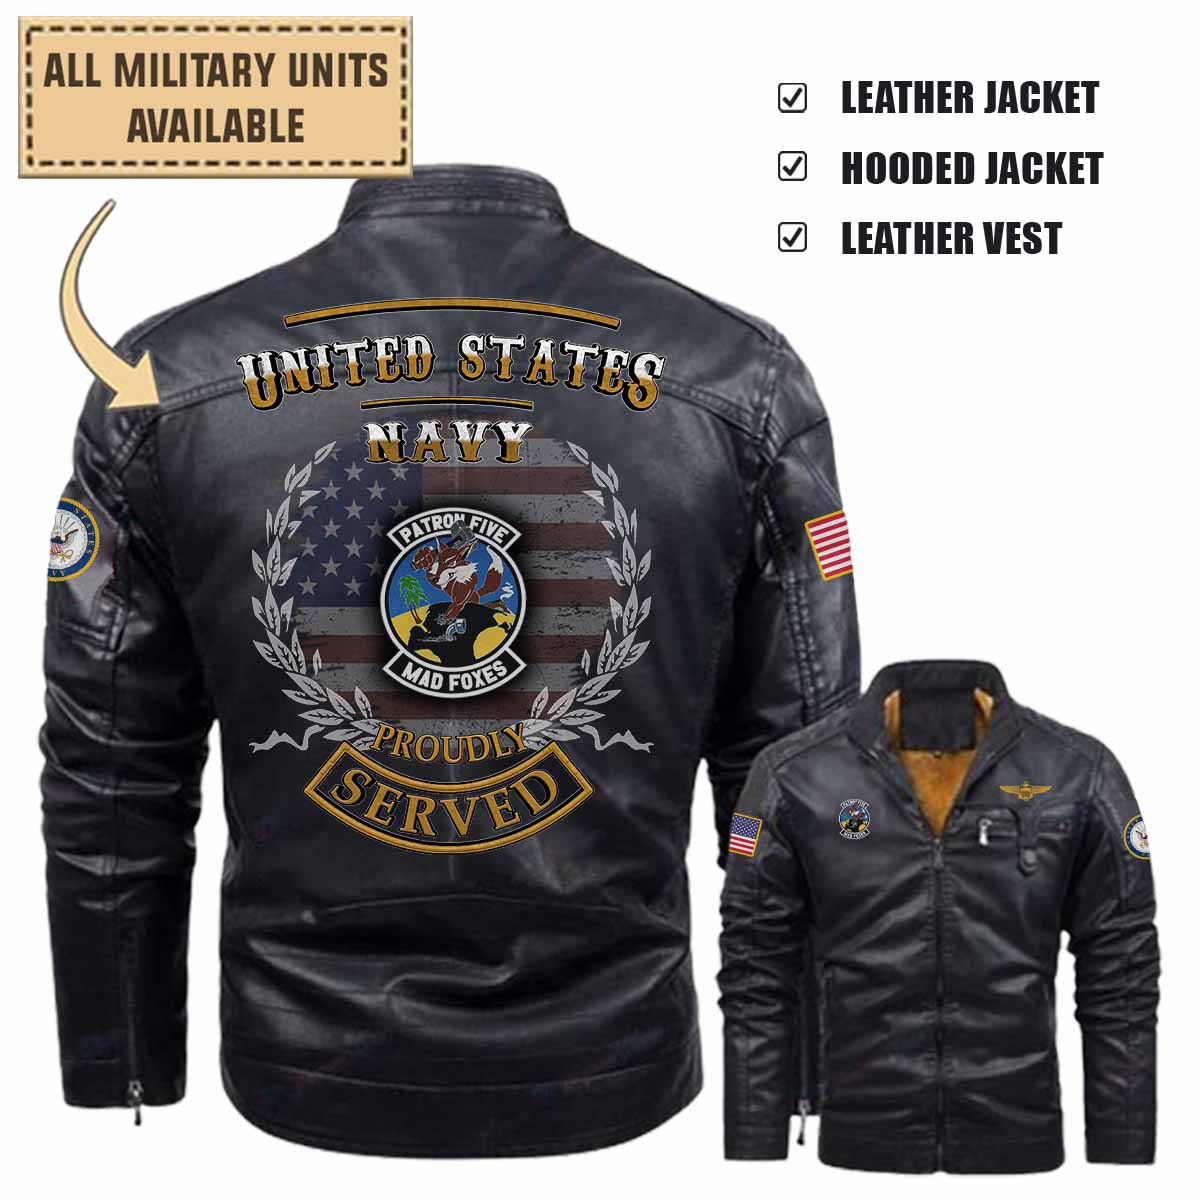 vp 5 mad foxesleather jacket and vest 8vybg